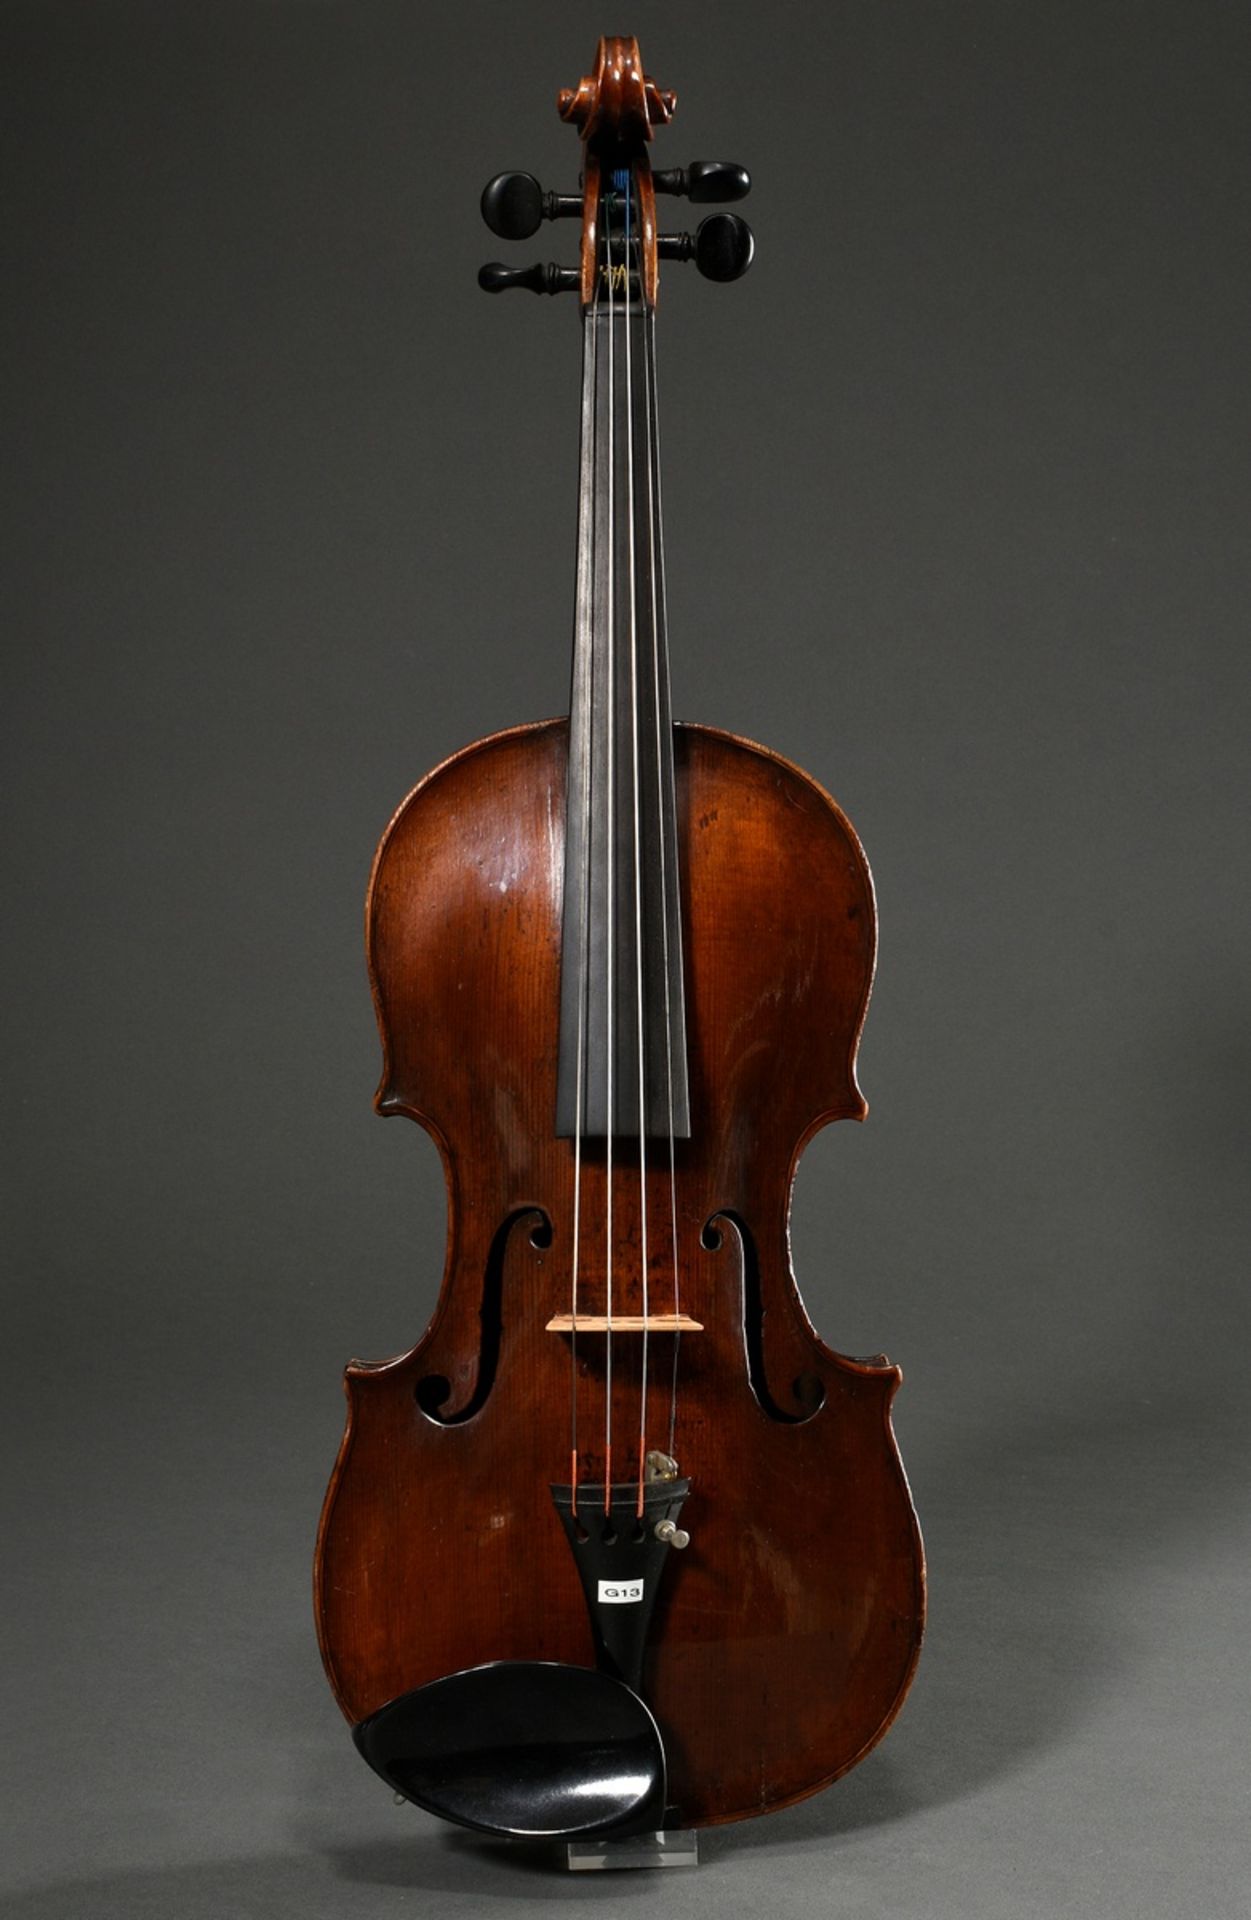 German master violin, Saxony, late 18th century, probably Pfretzschner or surrounding area, without